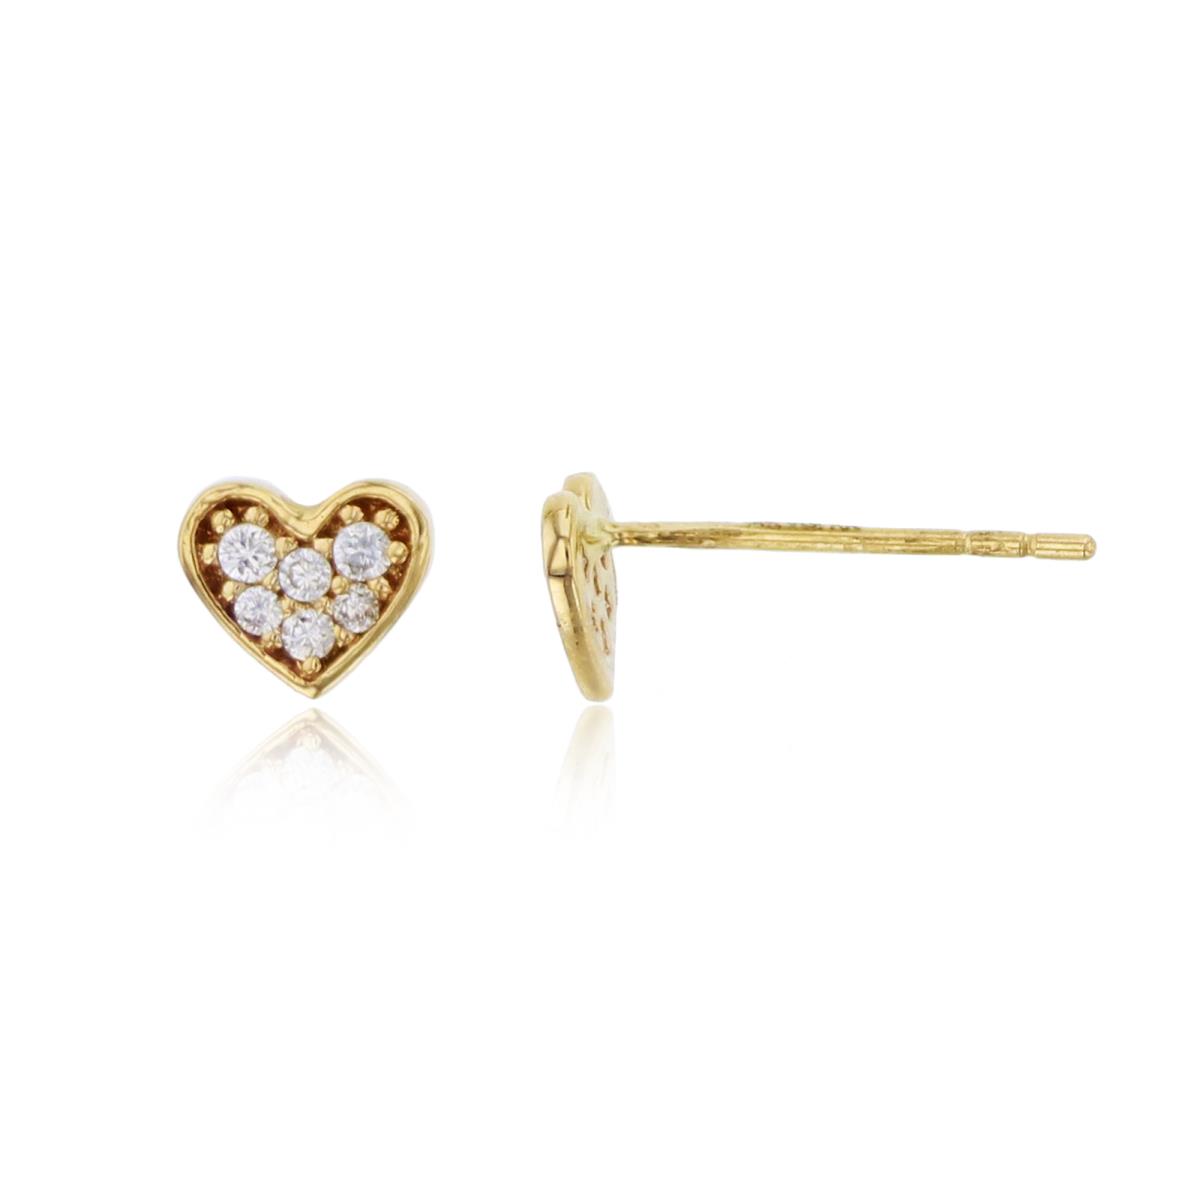 10K Yellow Gold Paved Heart Stud Earring (No Back)